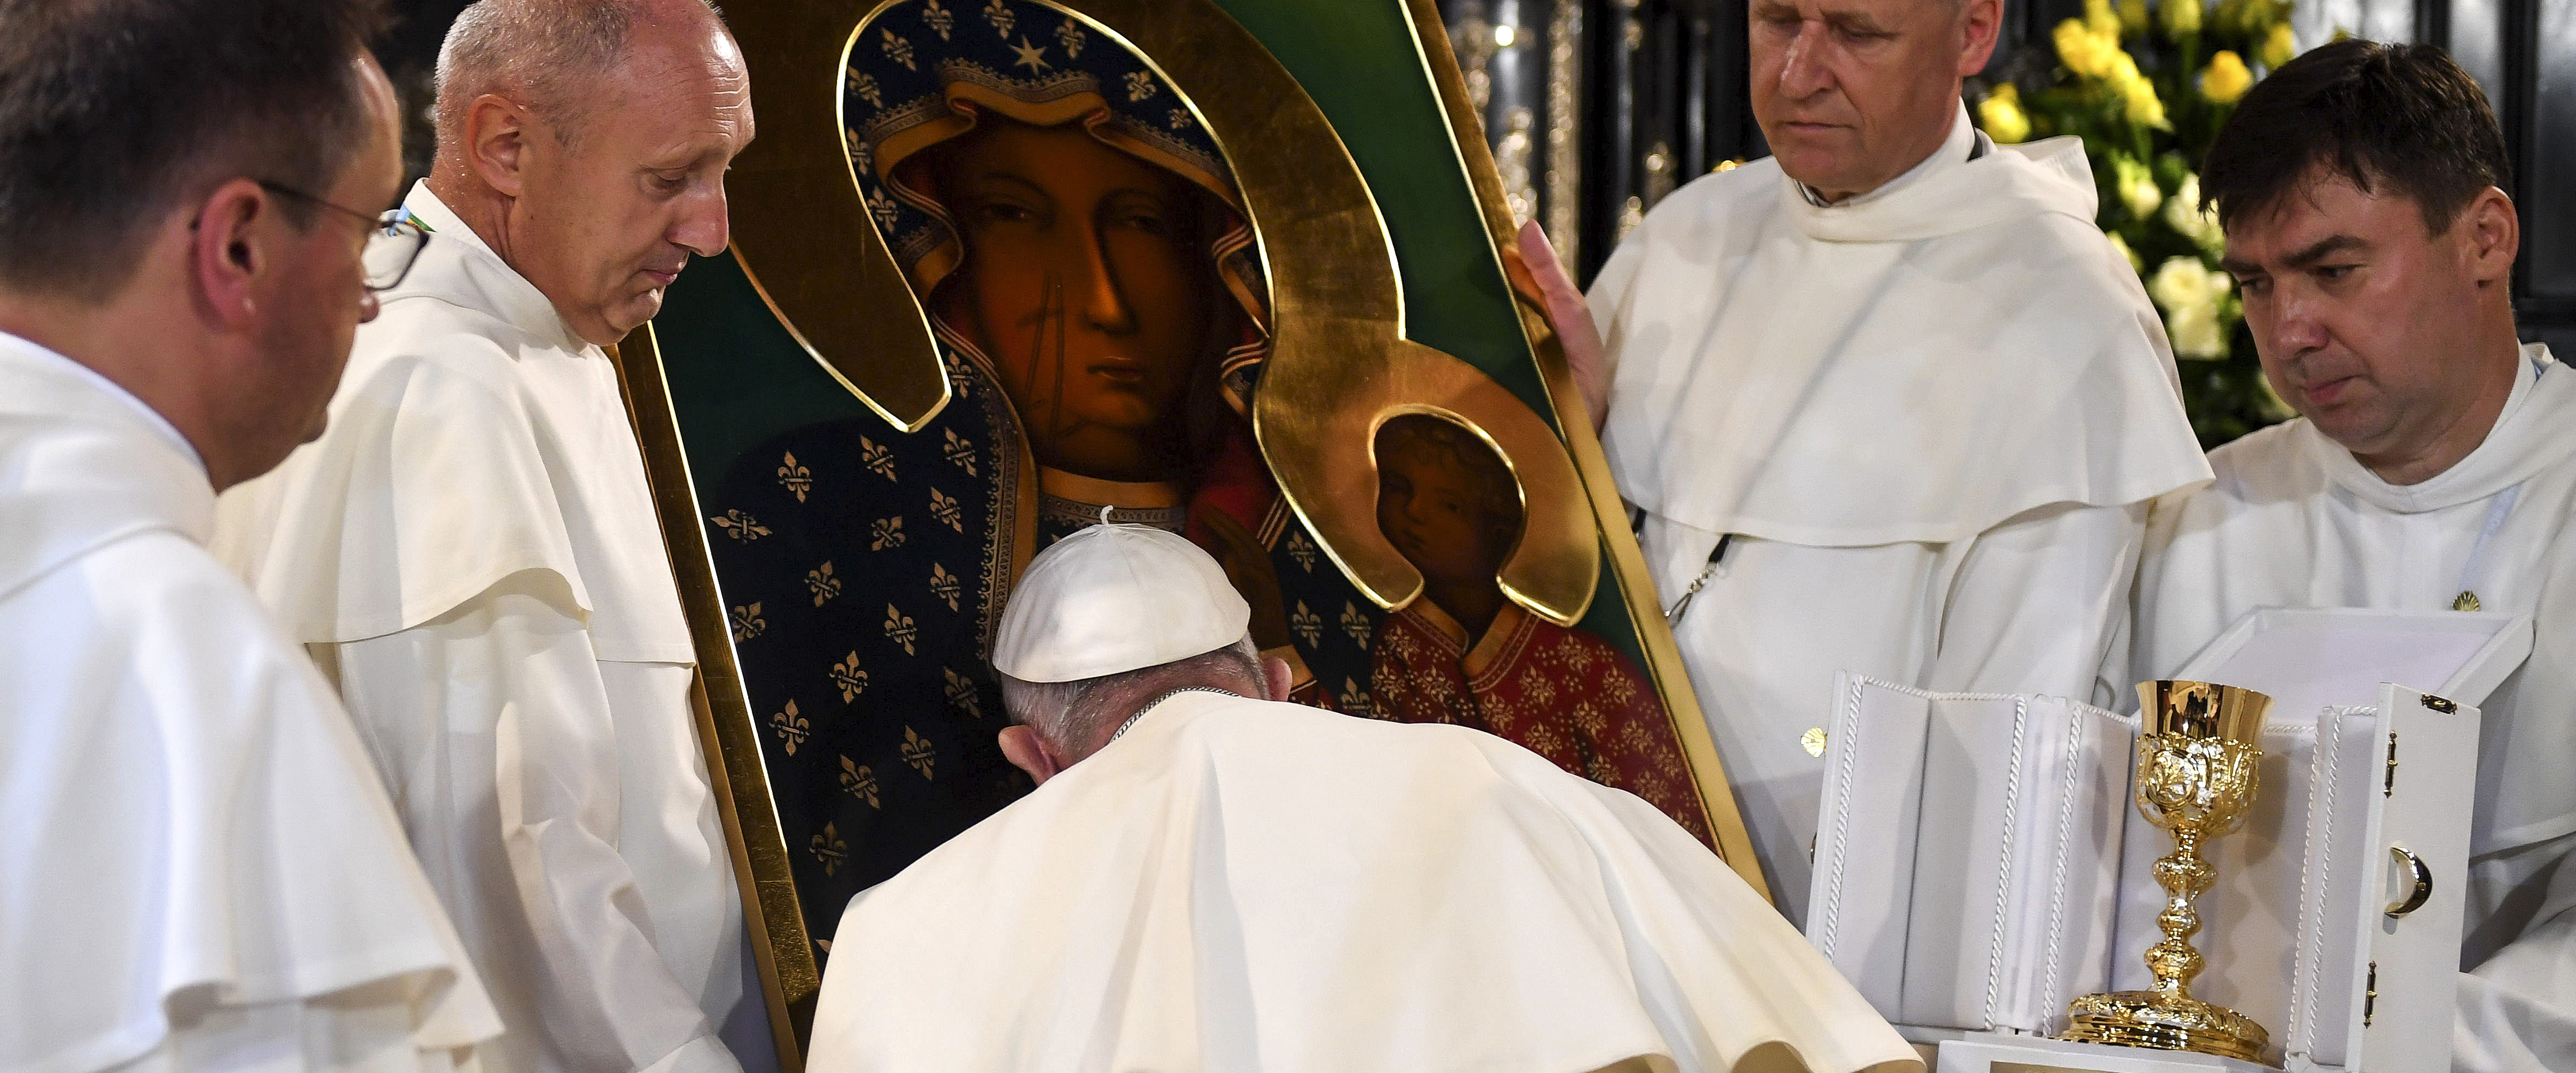 Pope Francis in The Chapel of the Blessed Virgin Mary